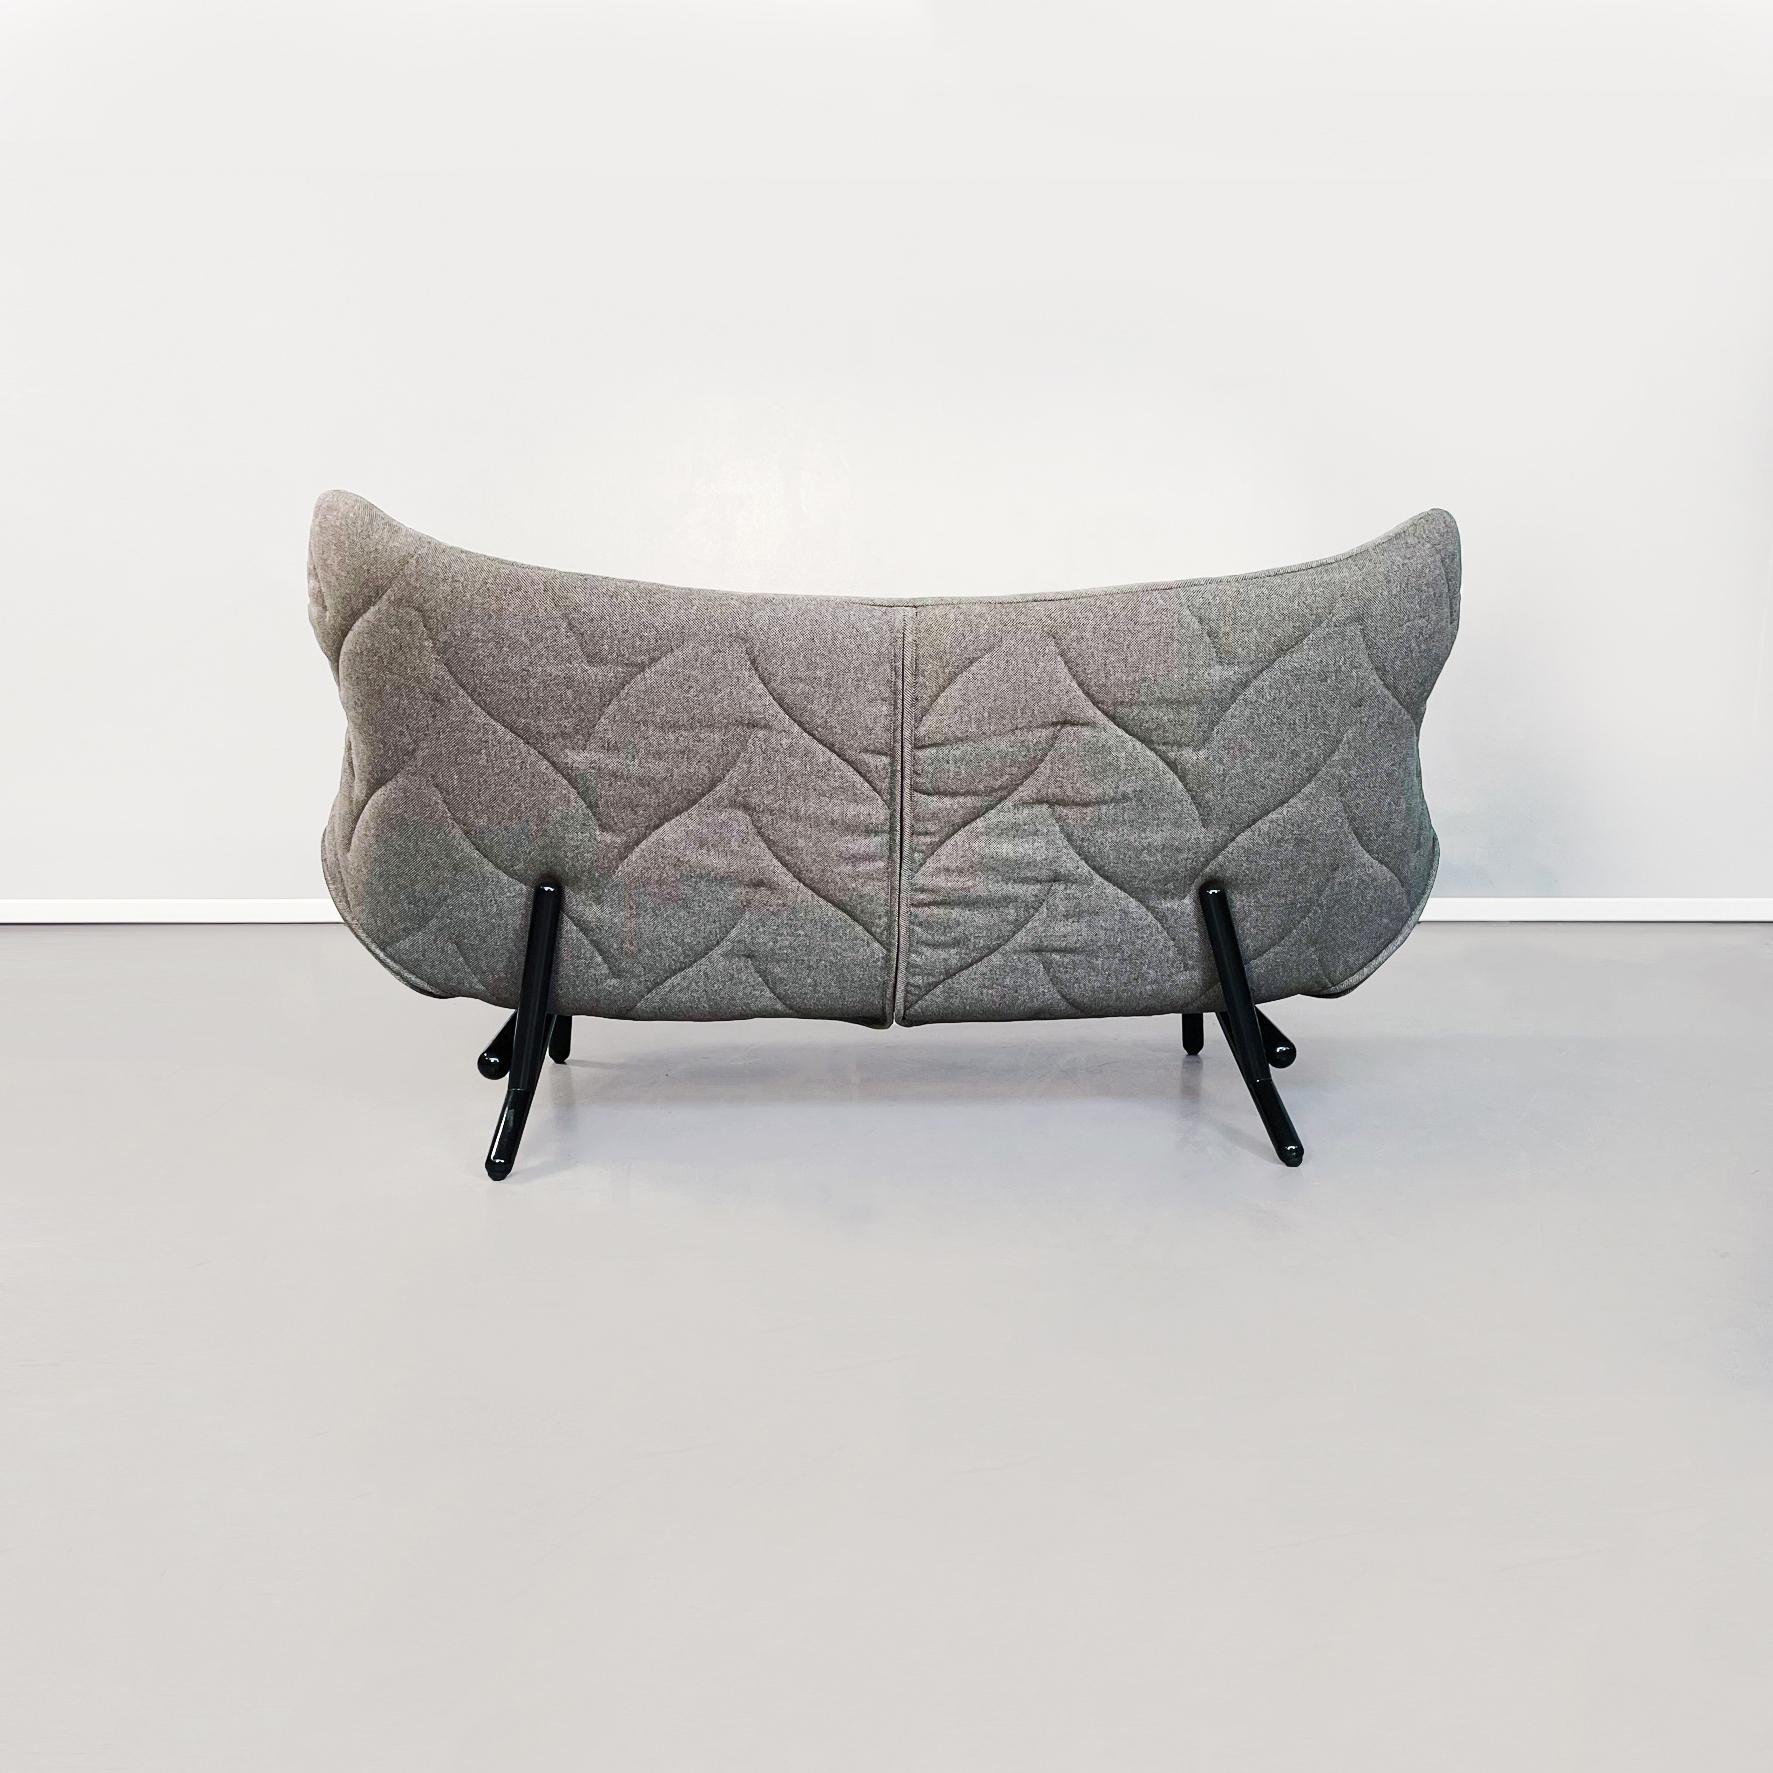 Italian Modern Grey Fabric and Black Iron Foliage Sofa by Kartell, 2000s In New Condition For Sale In MIlano, IT